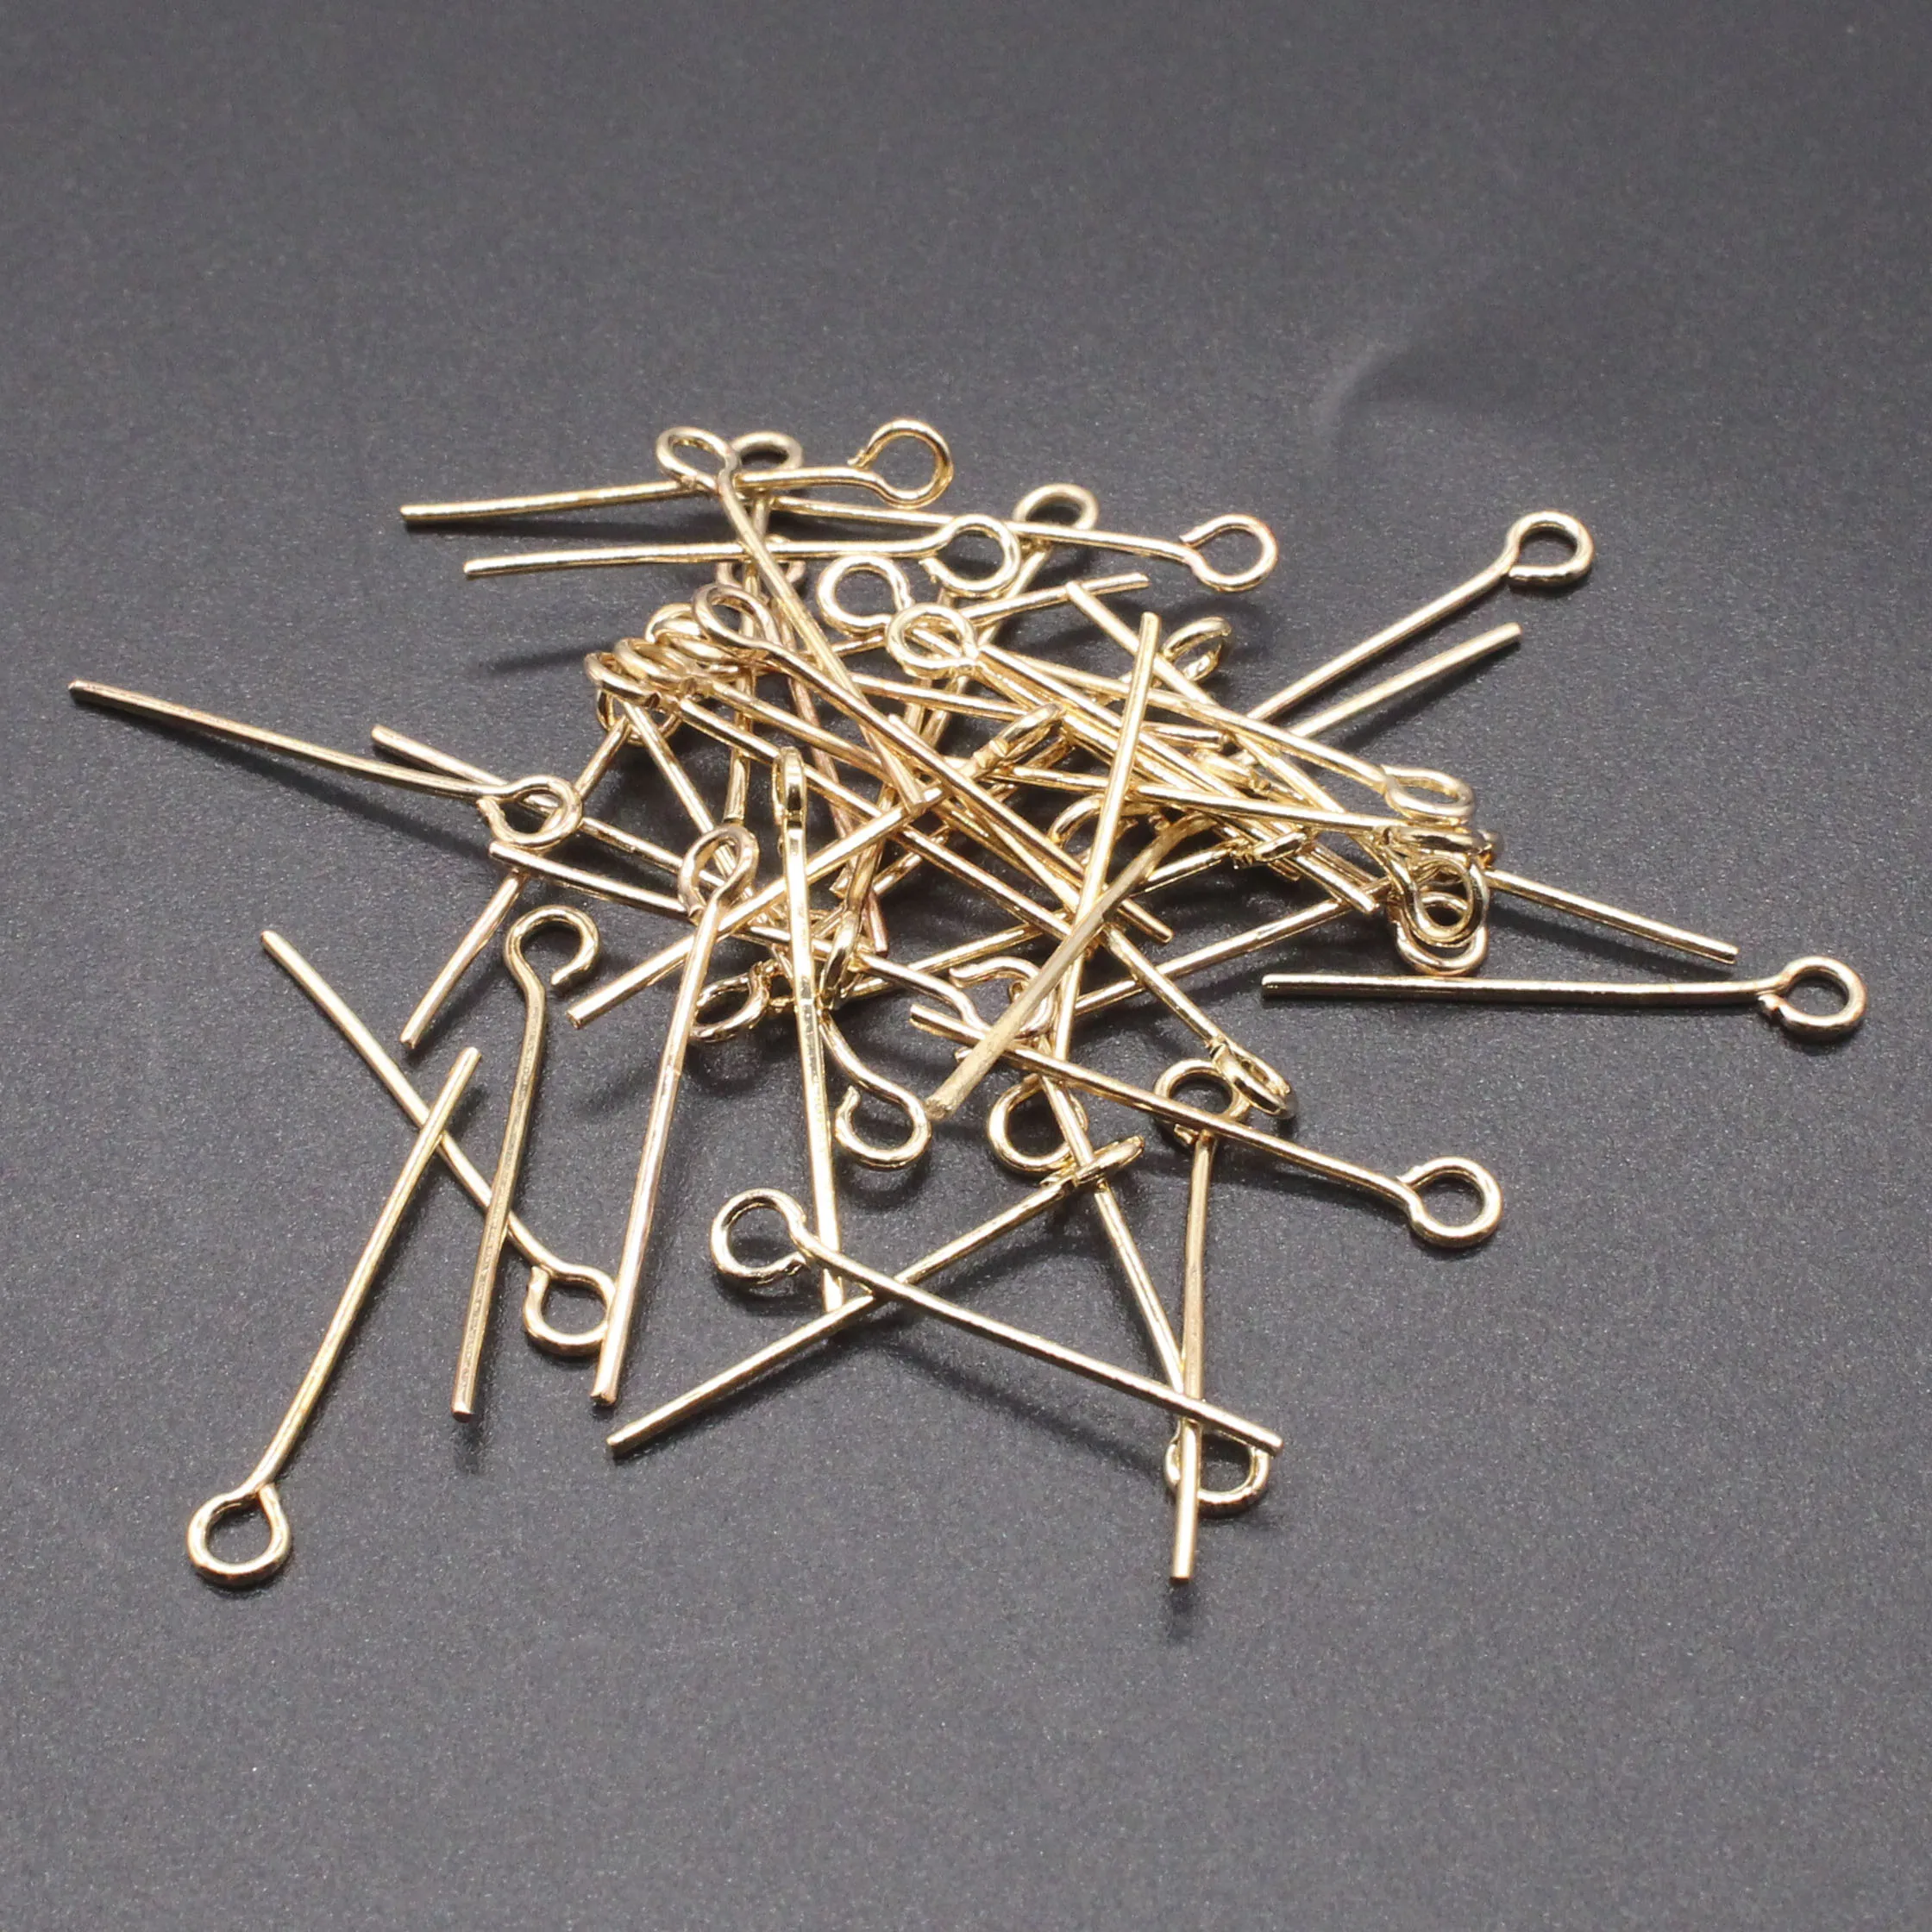 16 18 20 22 24 26 28 30 32mm Eye Head Pins Classic 6 Colors Plated Eye Pins  for Jewelry Findings Making DIY Earring Accessories